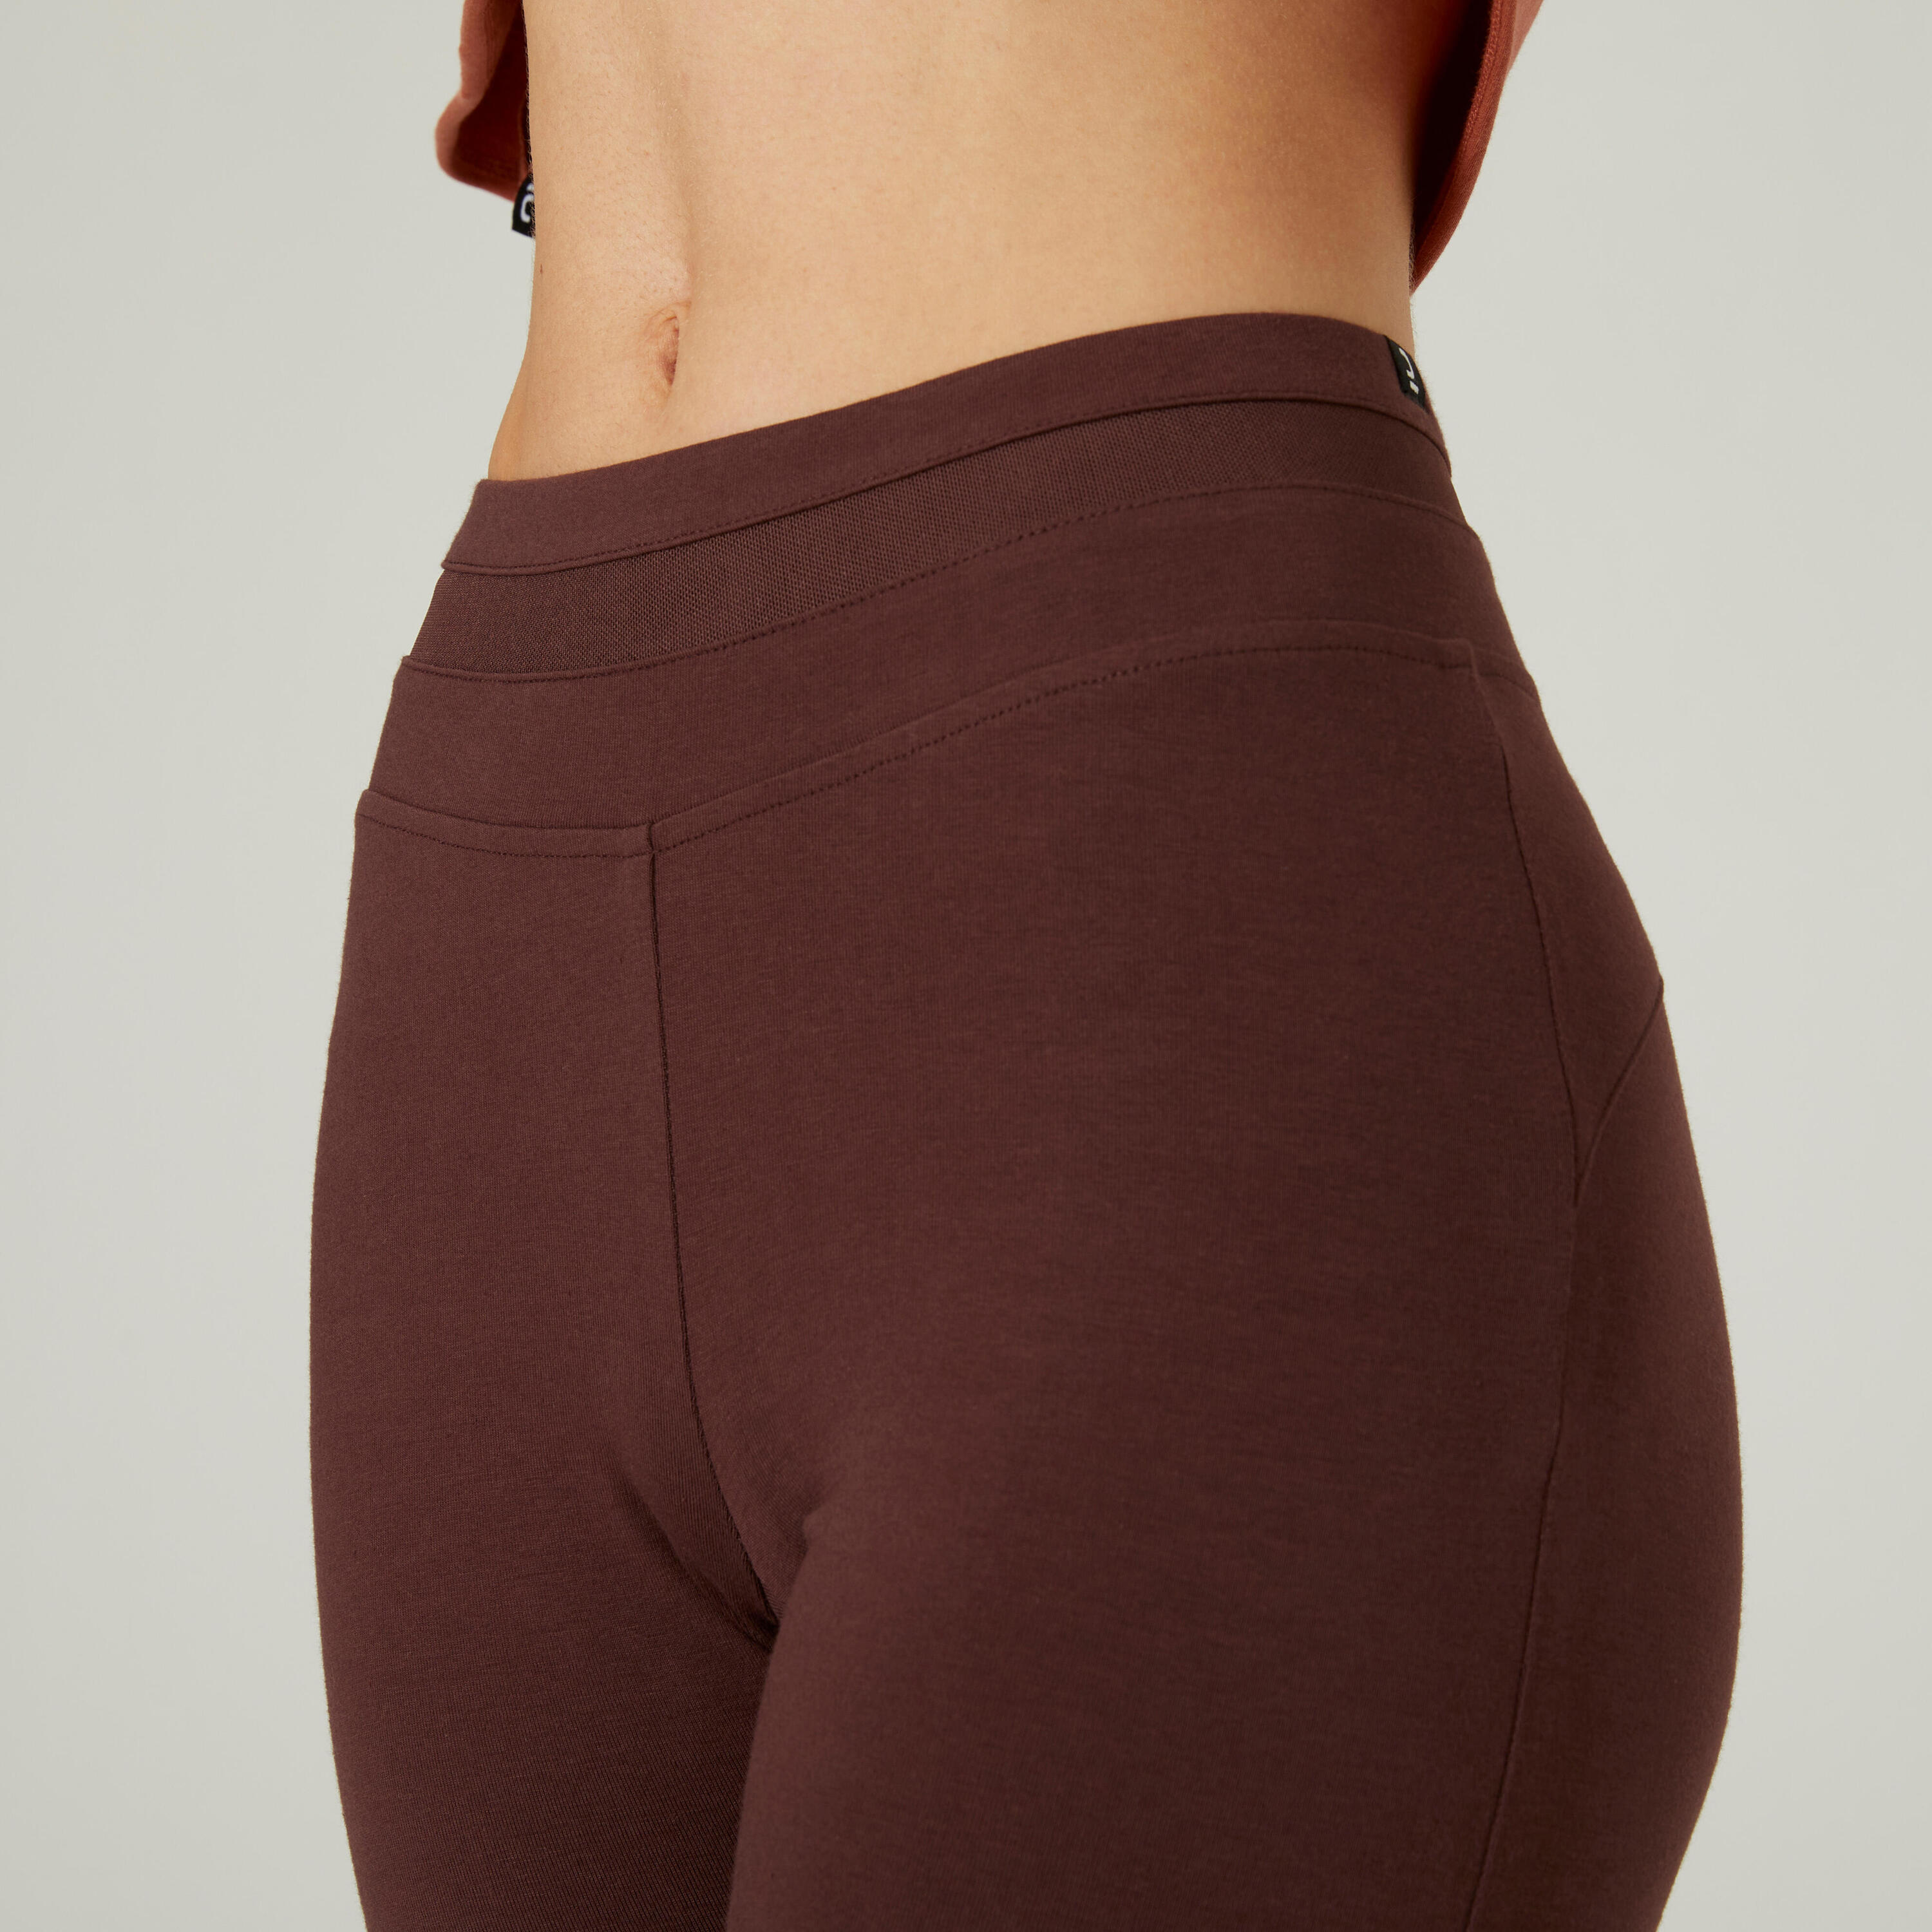 Stretchy High-Waisted Cotton Fitness Leggings with Mesh - Brown 5/7